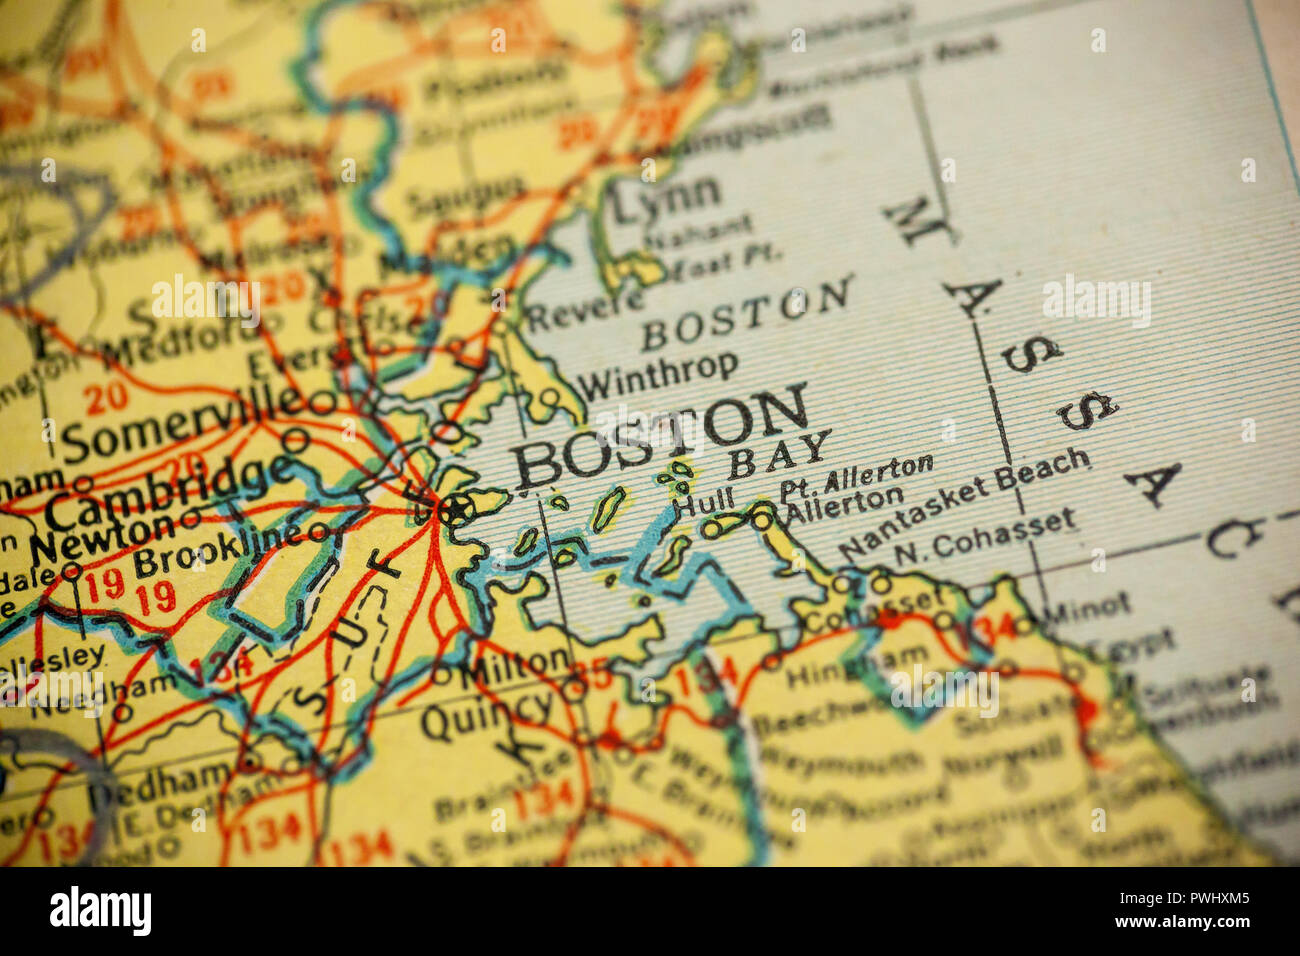 Boston, Massachusetts is the center of focus on an old map. Stock Photo